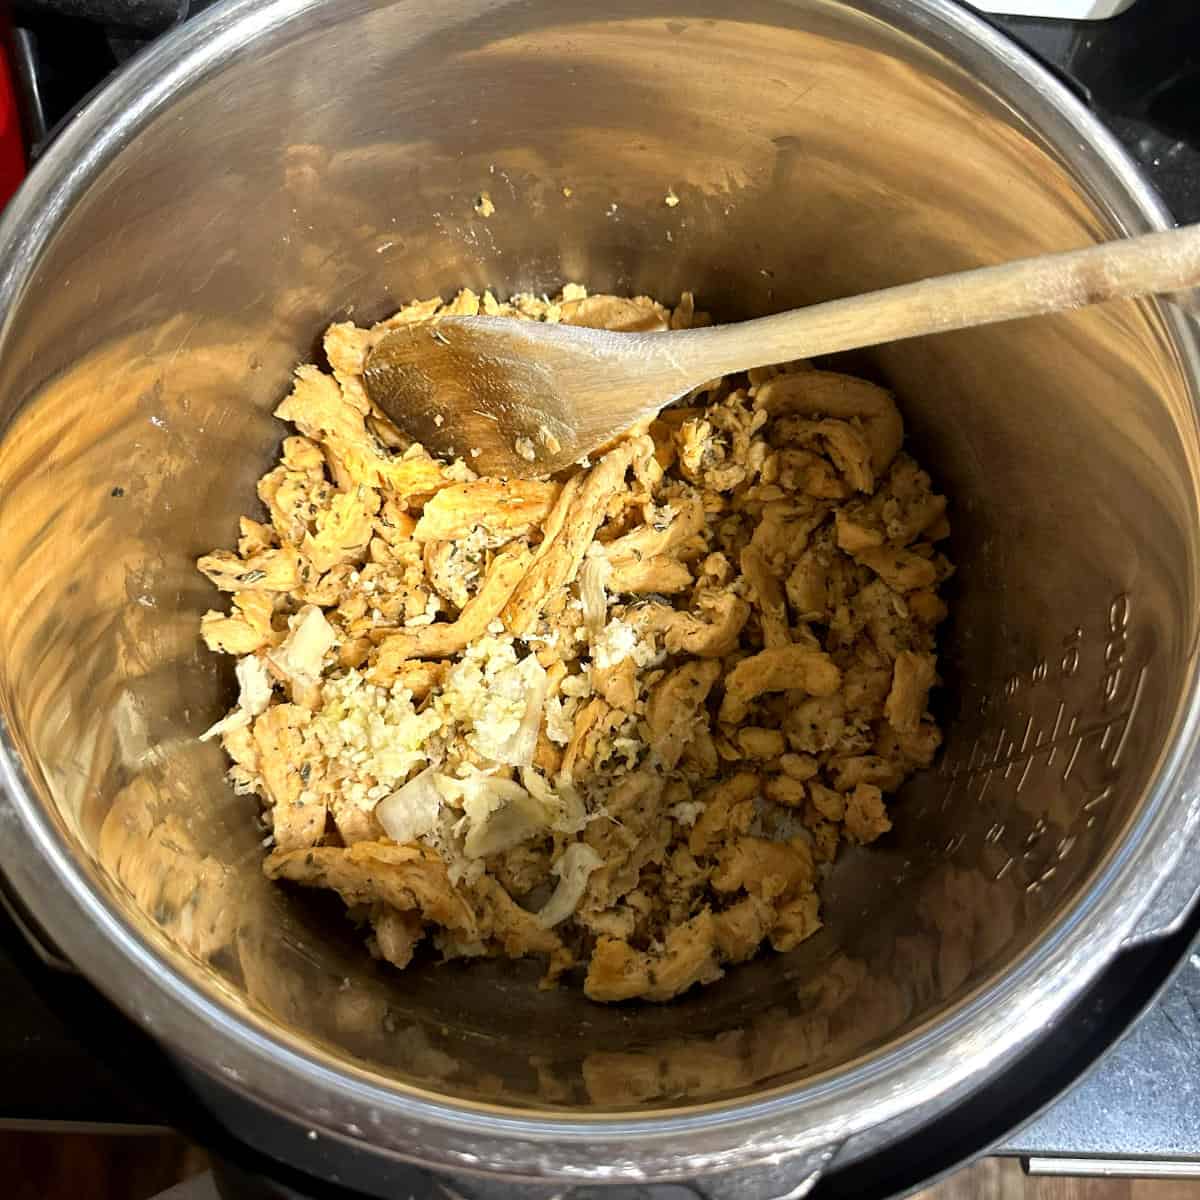 Garlic added to soy curls in IP.